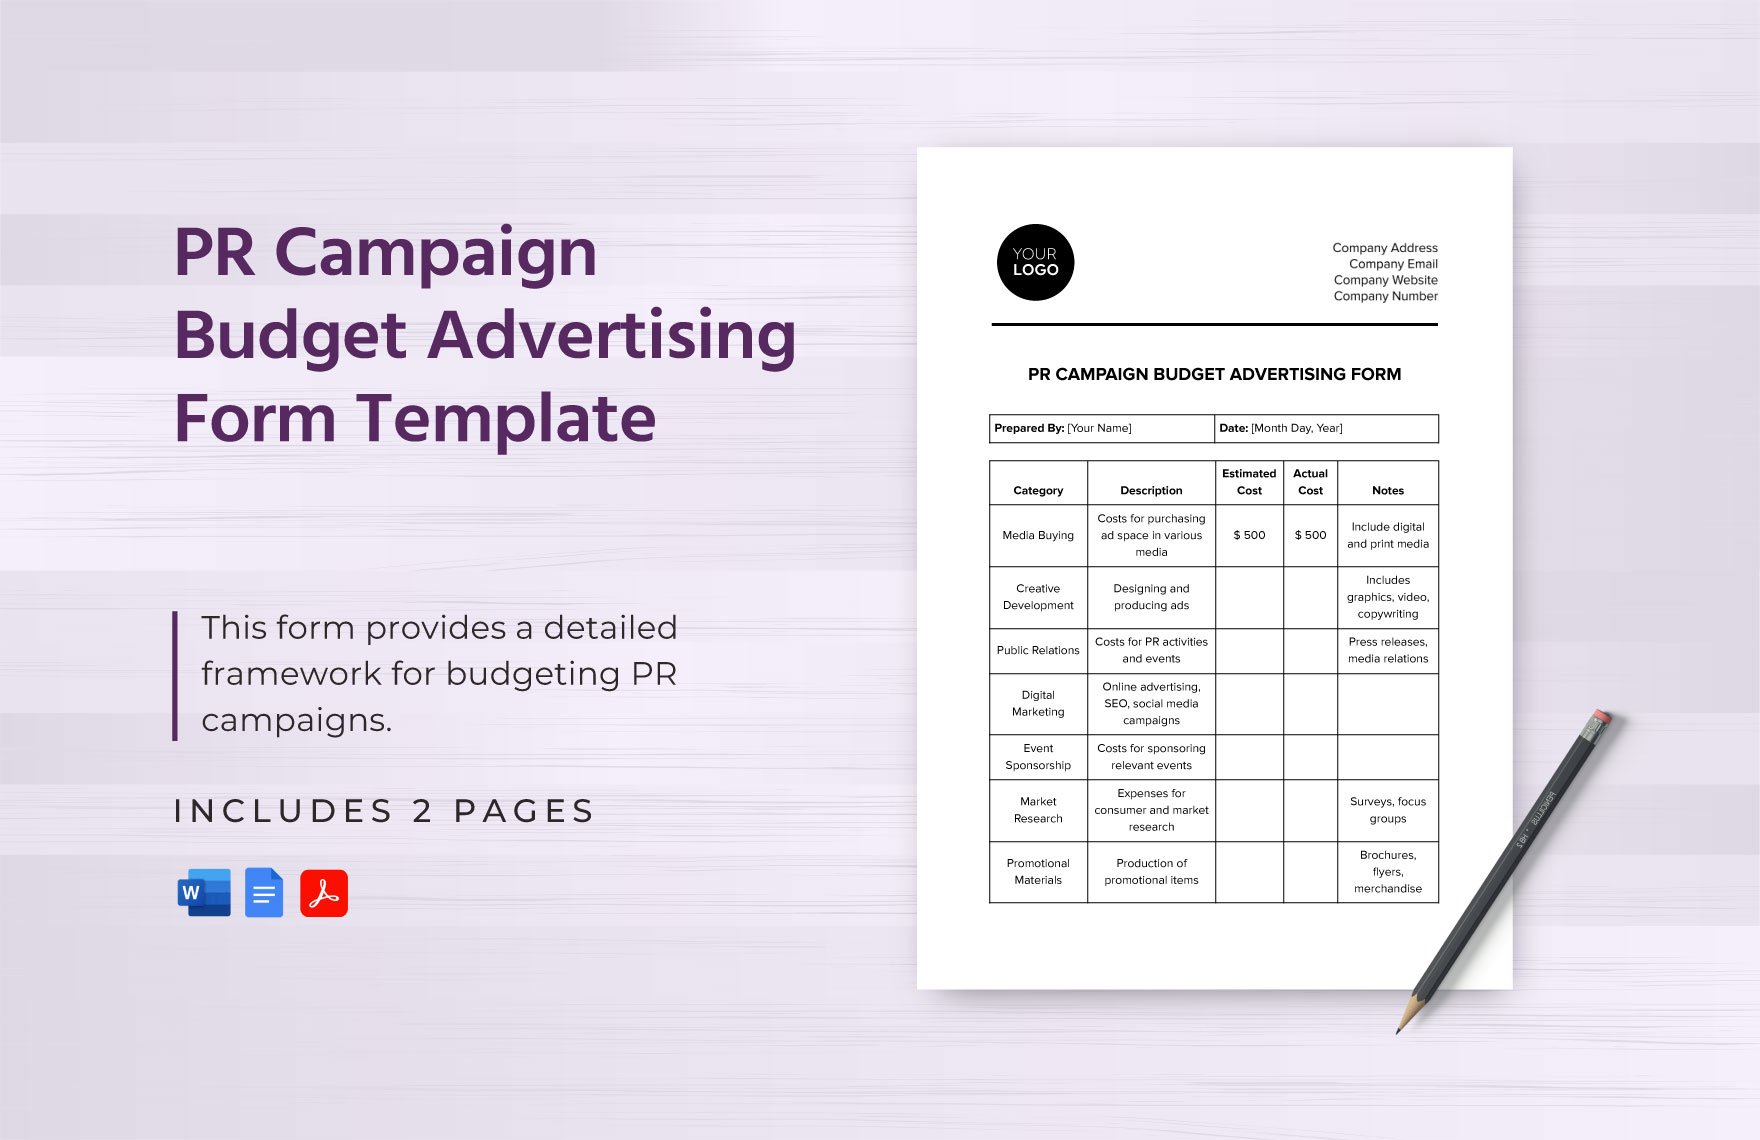 PR Campaign Budget Advertising Form Template in Word, Google Docs, PDF